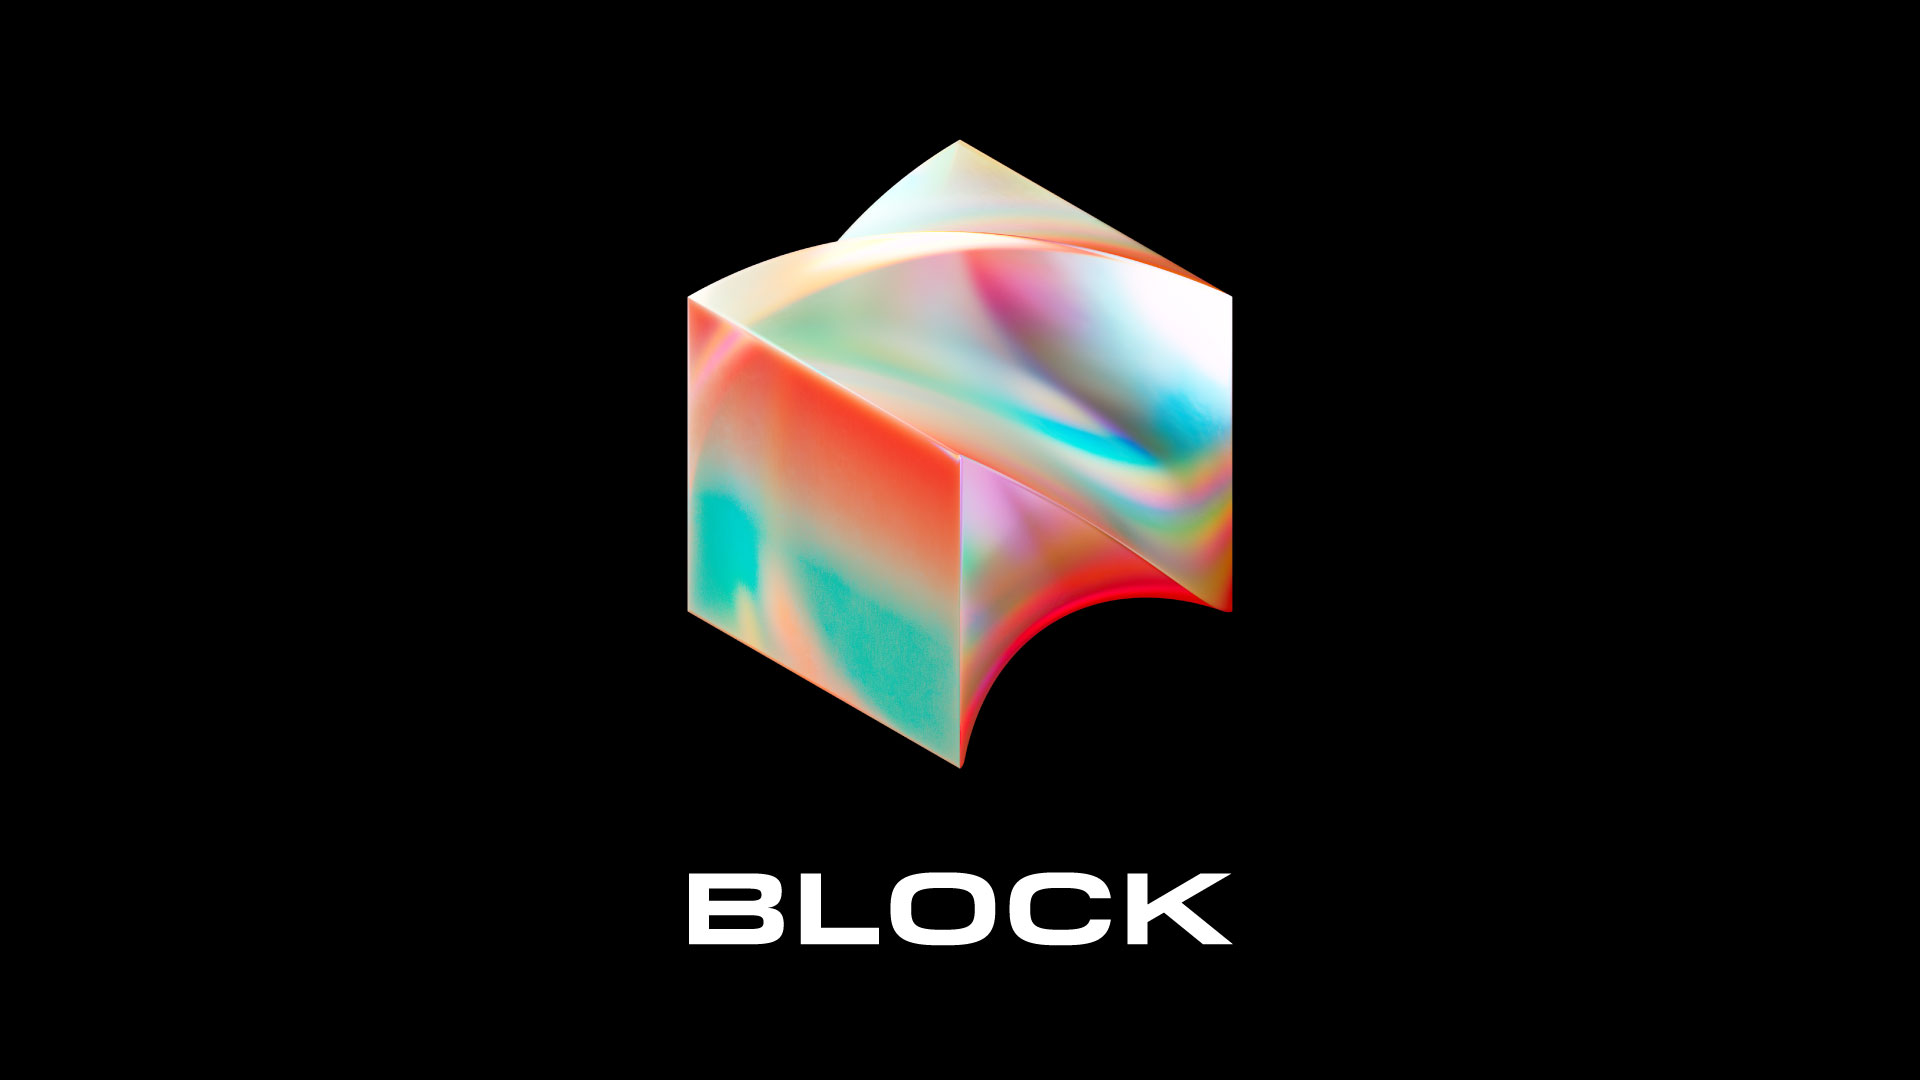 A cube-like block is in the middle of the image above the text “Block”